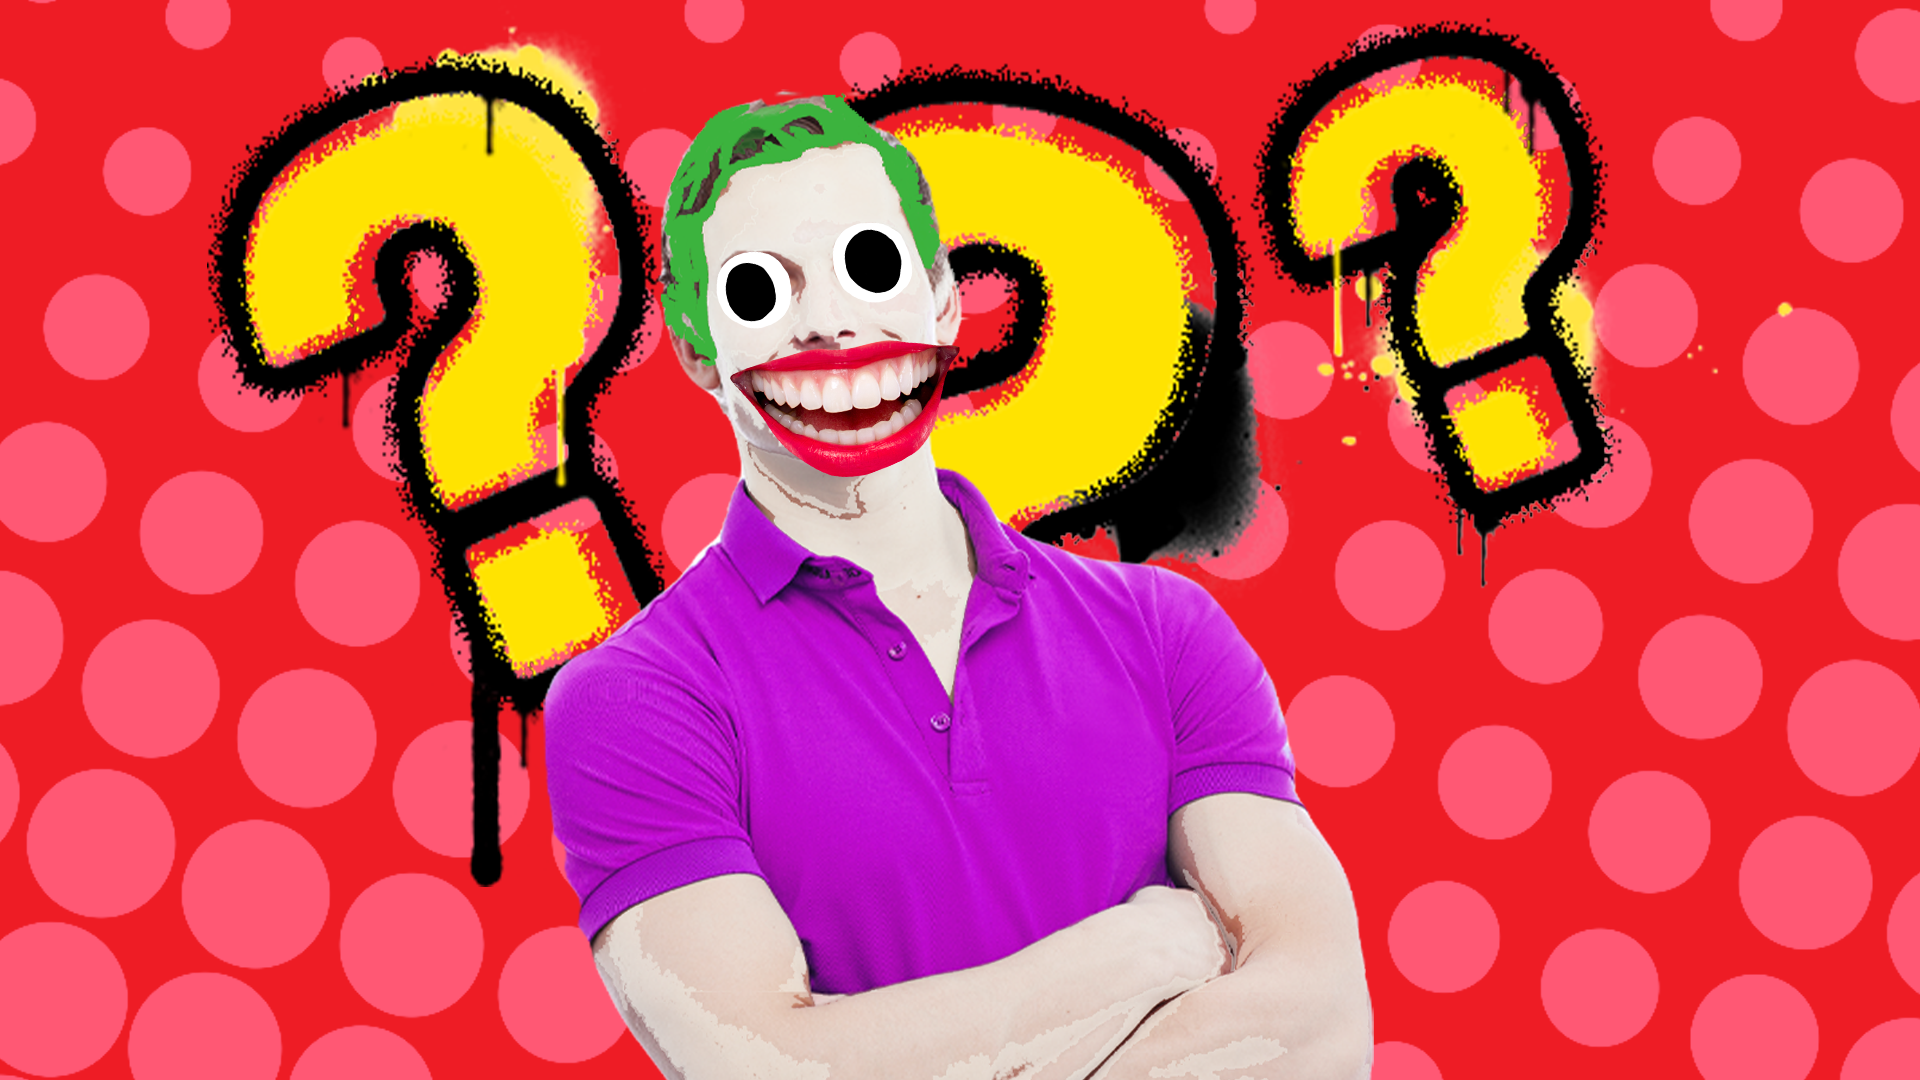 Beano joker with question marks on red background